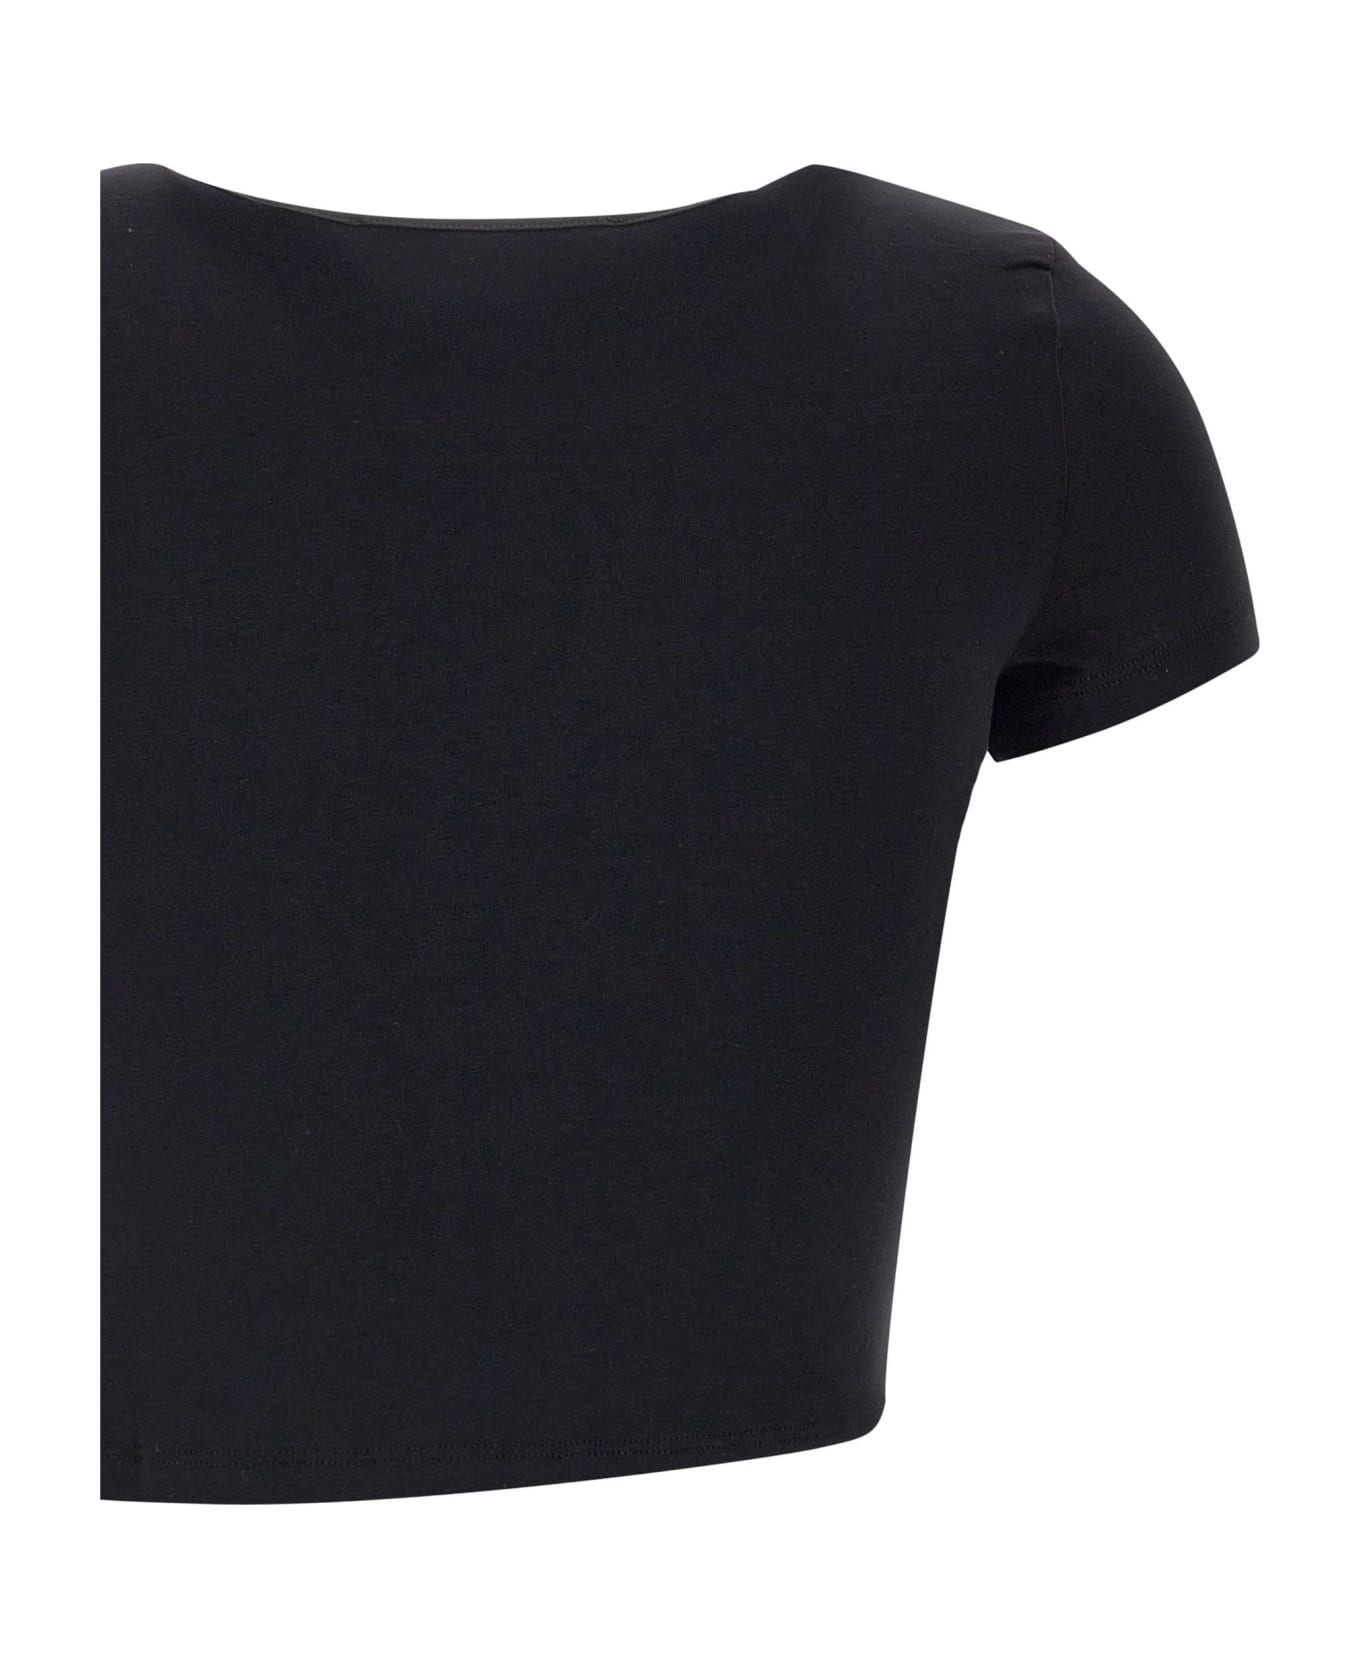 Rotate by Birger Christensen "may" Top - BLACK Tシャツ